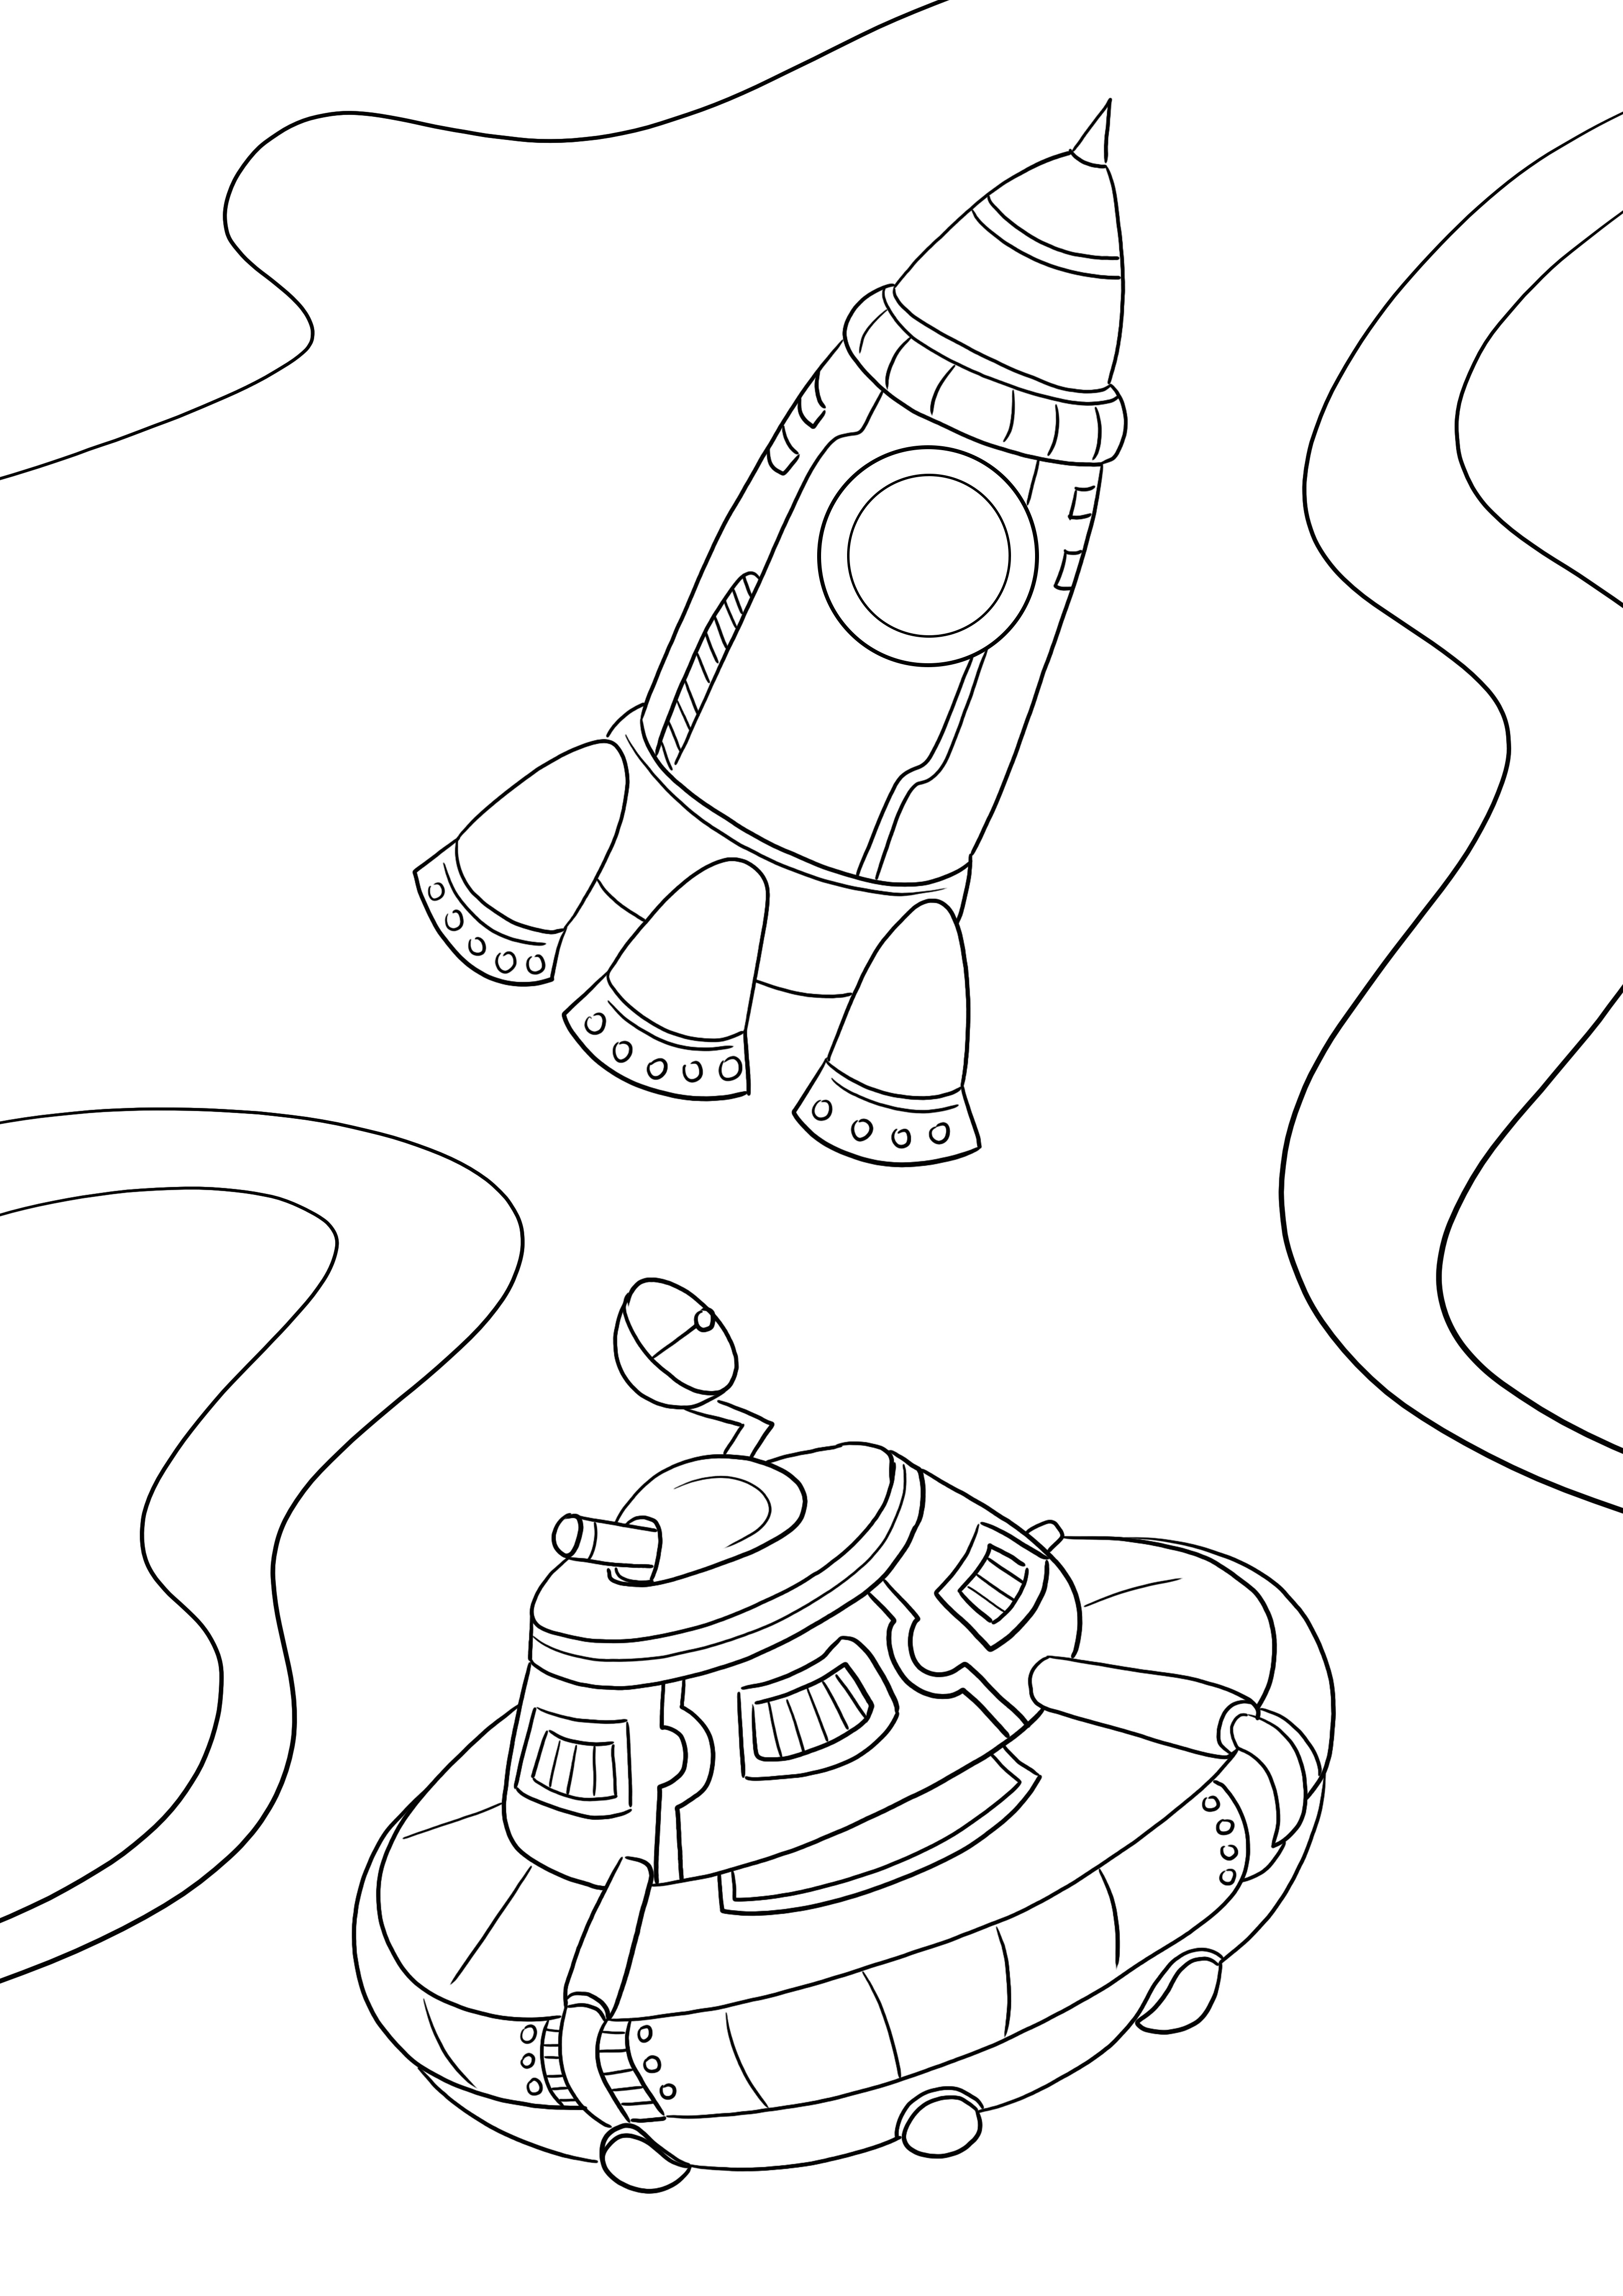 Two spaceships-free printables for easy coloring for kids